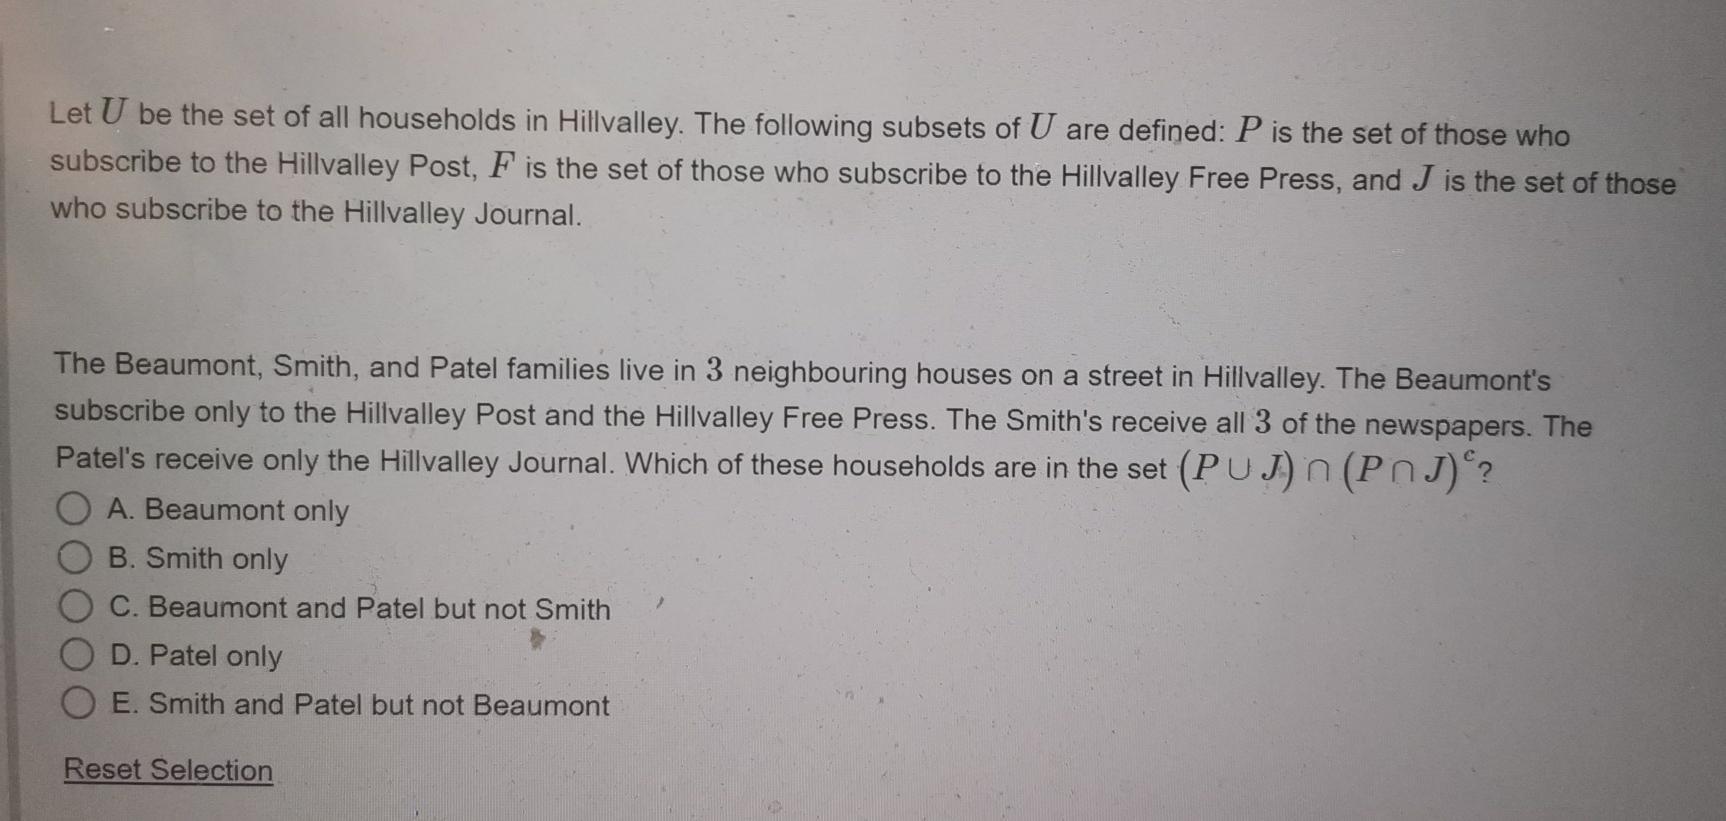 Let U be the set of all households in Hillvalley. The following subsets of U are defined: P is the set of those whosubscribe